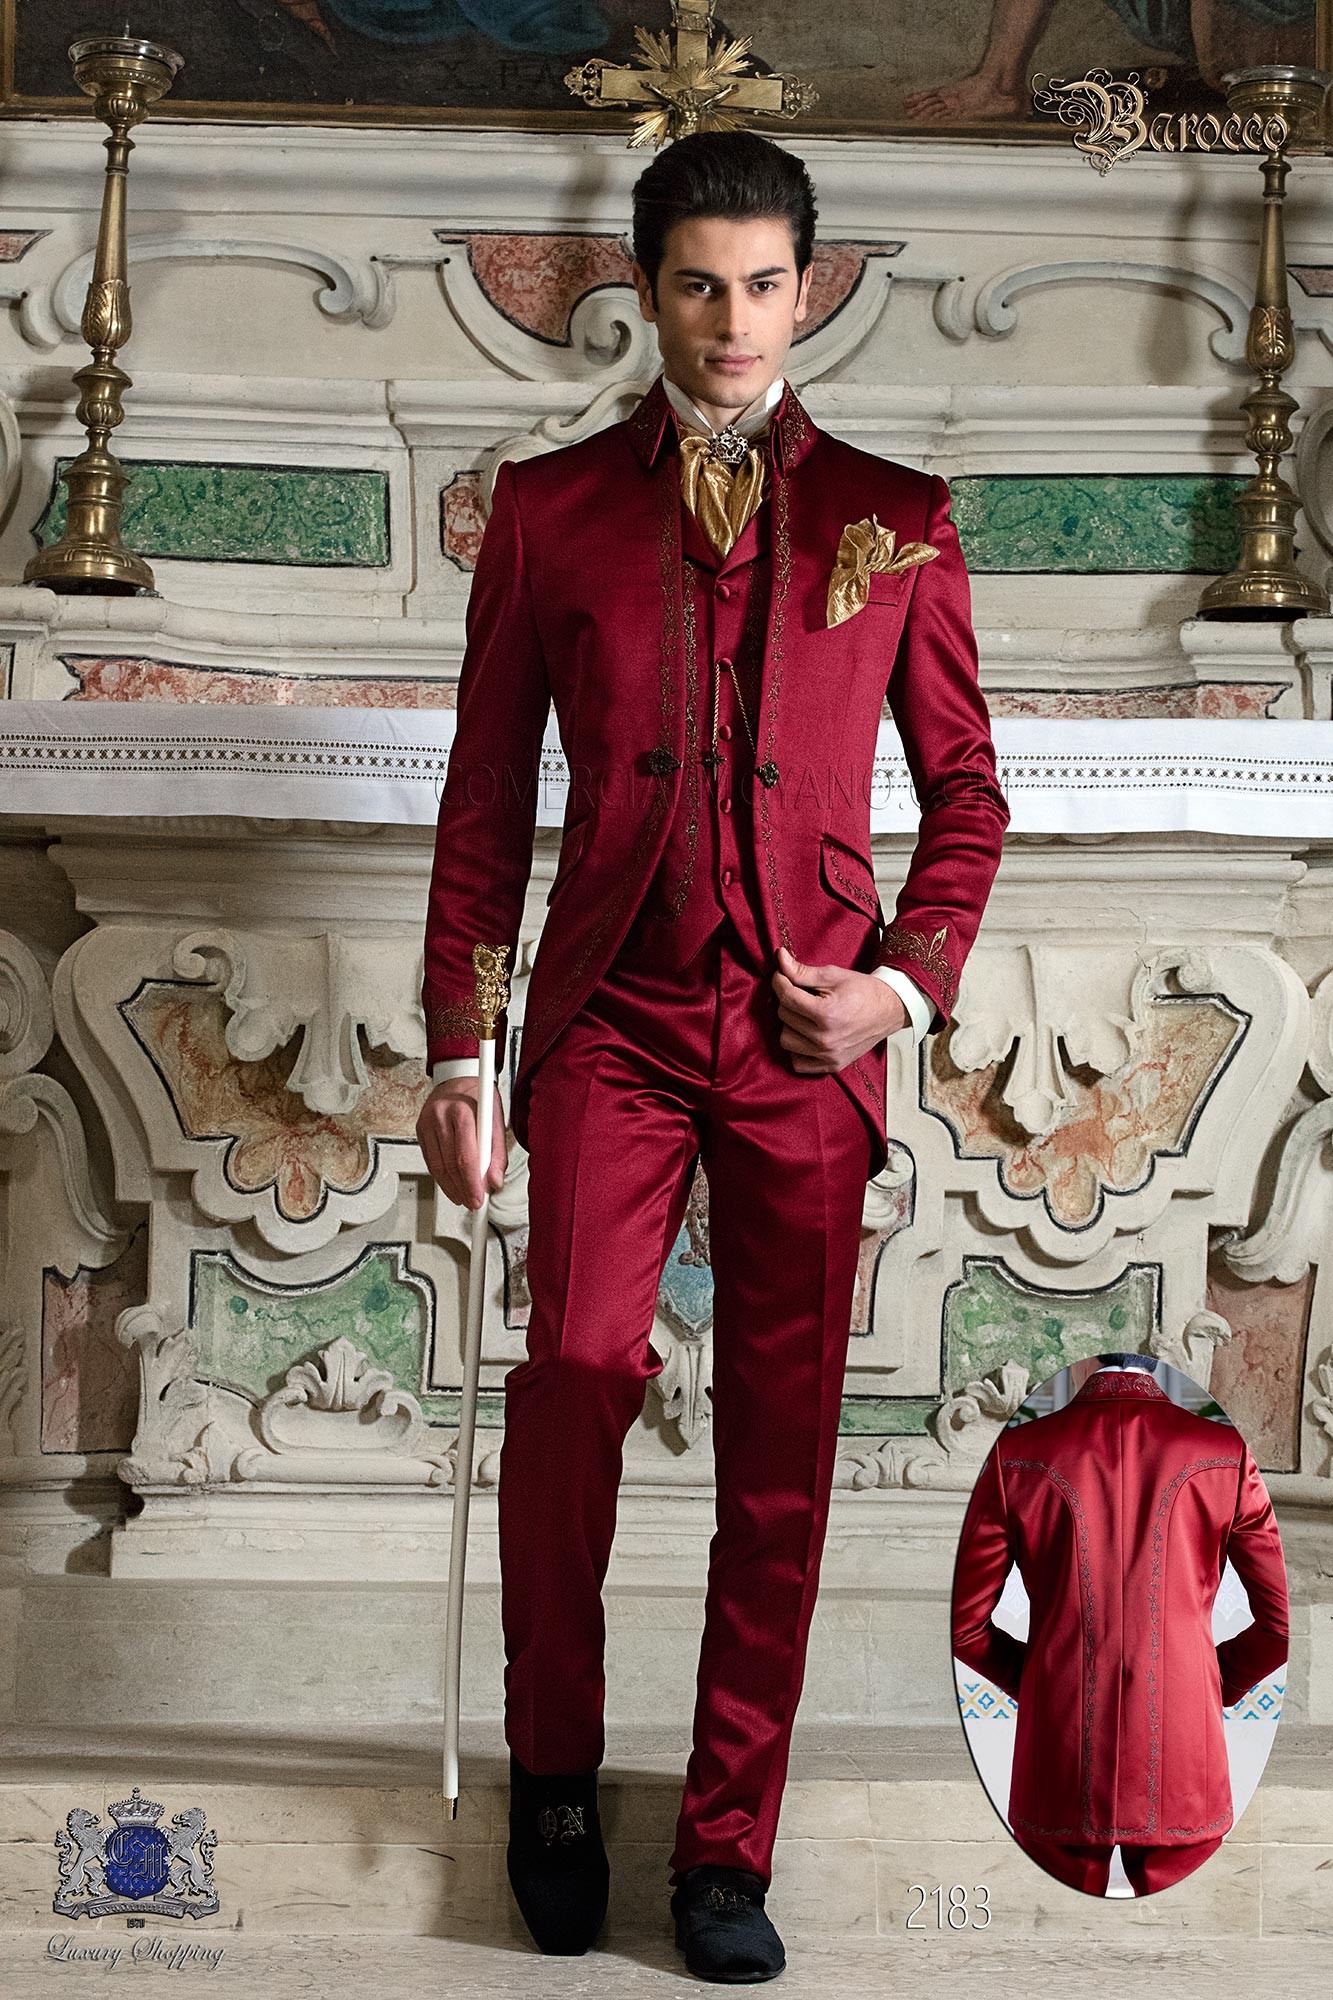 SUJET COMMUN || le bal de la nouvelle année  Groomswear-baroque-vintage-suit-jacket-in-red-satin-embroidered-with-gold-colored-yarns